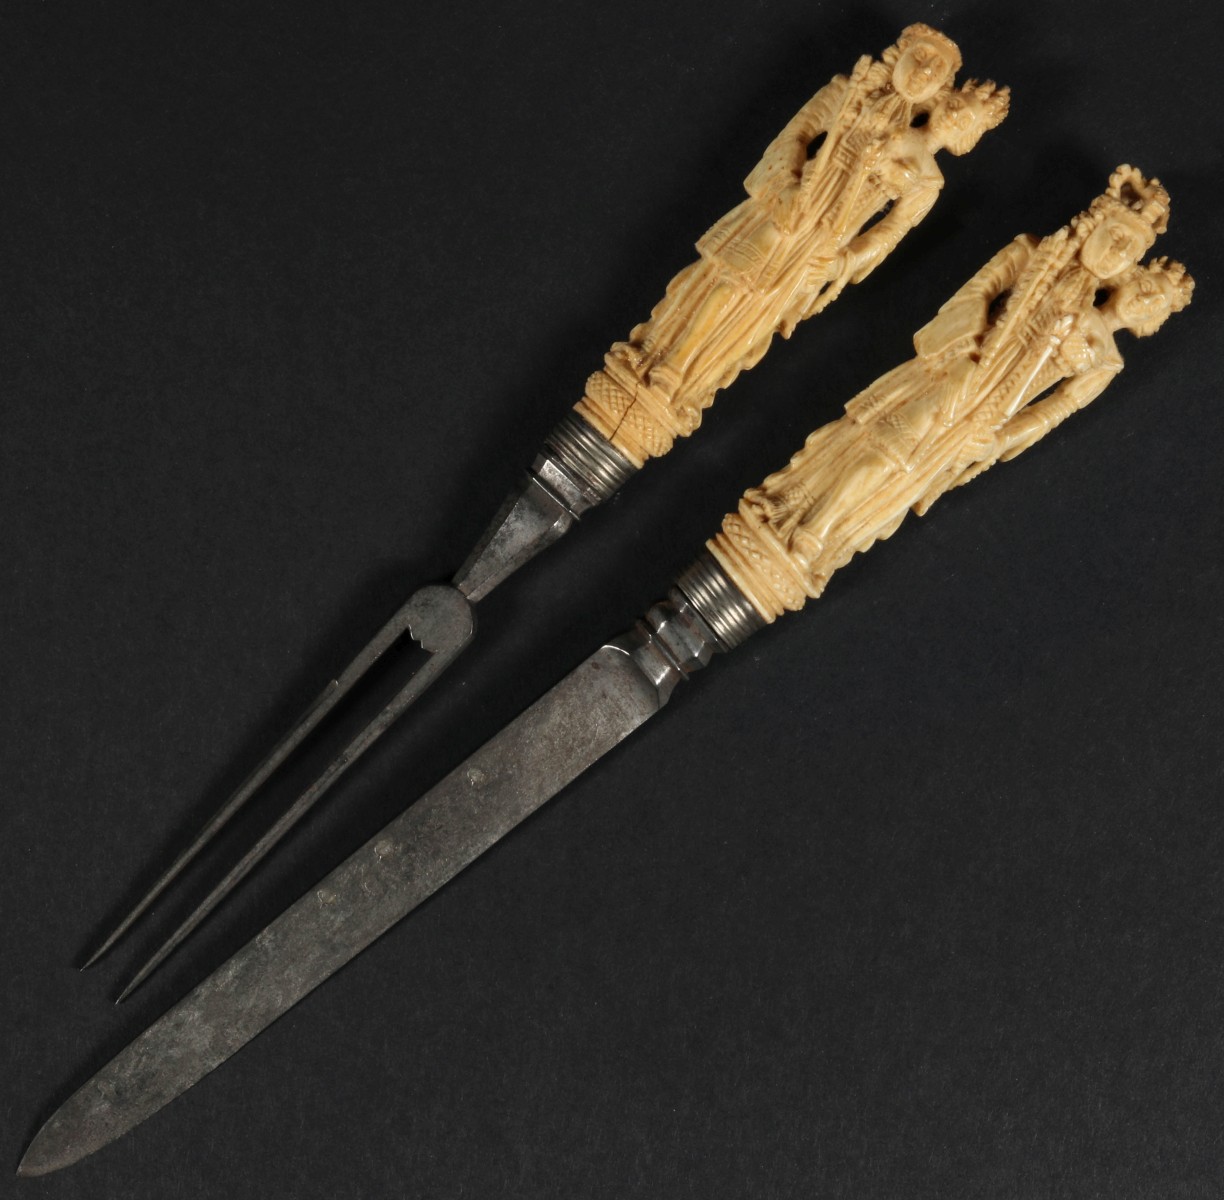 TWO UTENSILS WITH 18TH CENTURY CARVED IVORY HANDLES